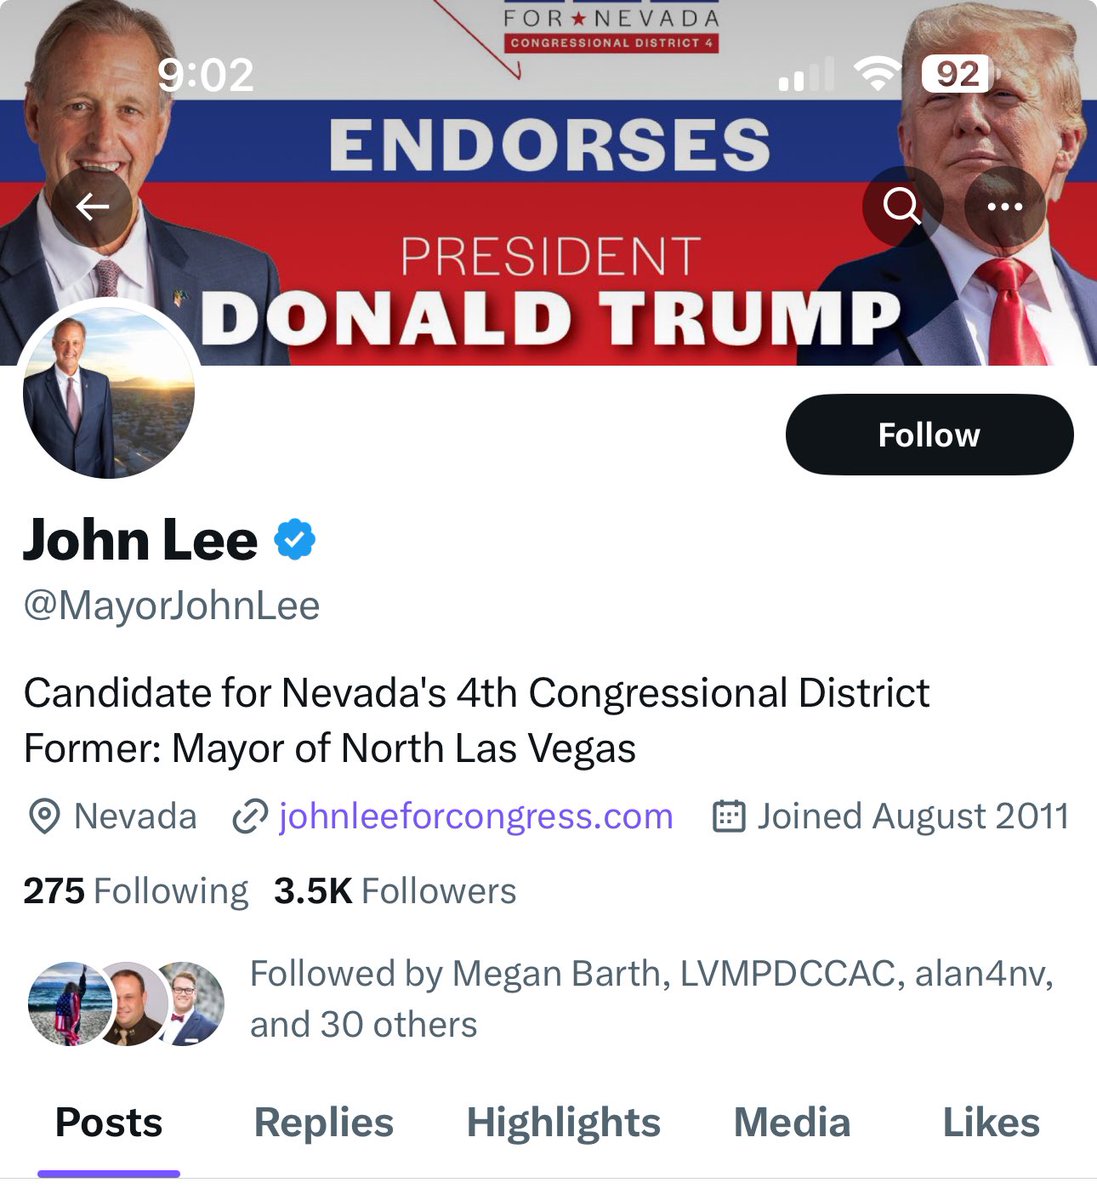 .@MayorJohnLee John Lee, You need to change your X banner. How are you going to say you “endorse President Trump” and tweet about him endorsing you when days ago you couldn’t even commit to whether you would still vote for him if he was a “convicted felon”. You are just awful.